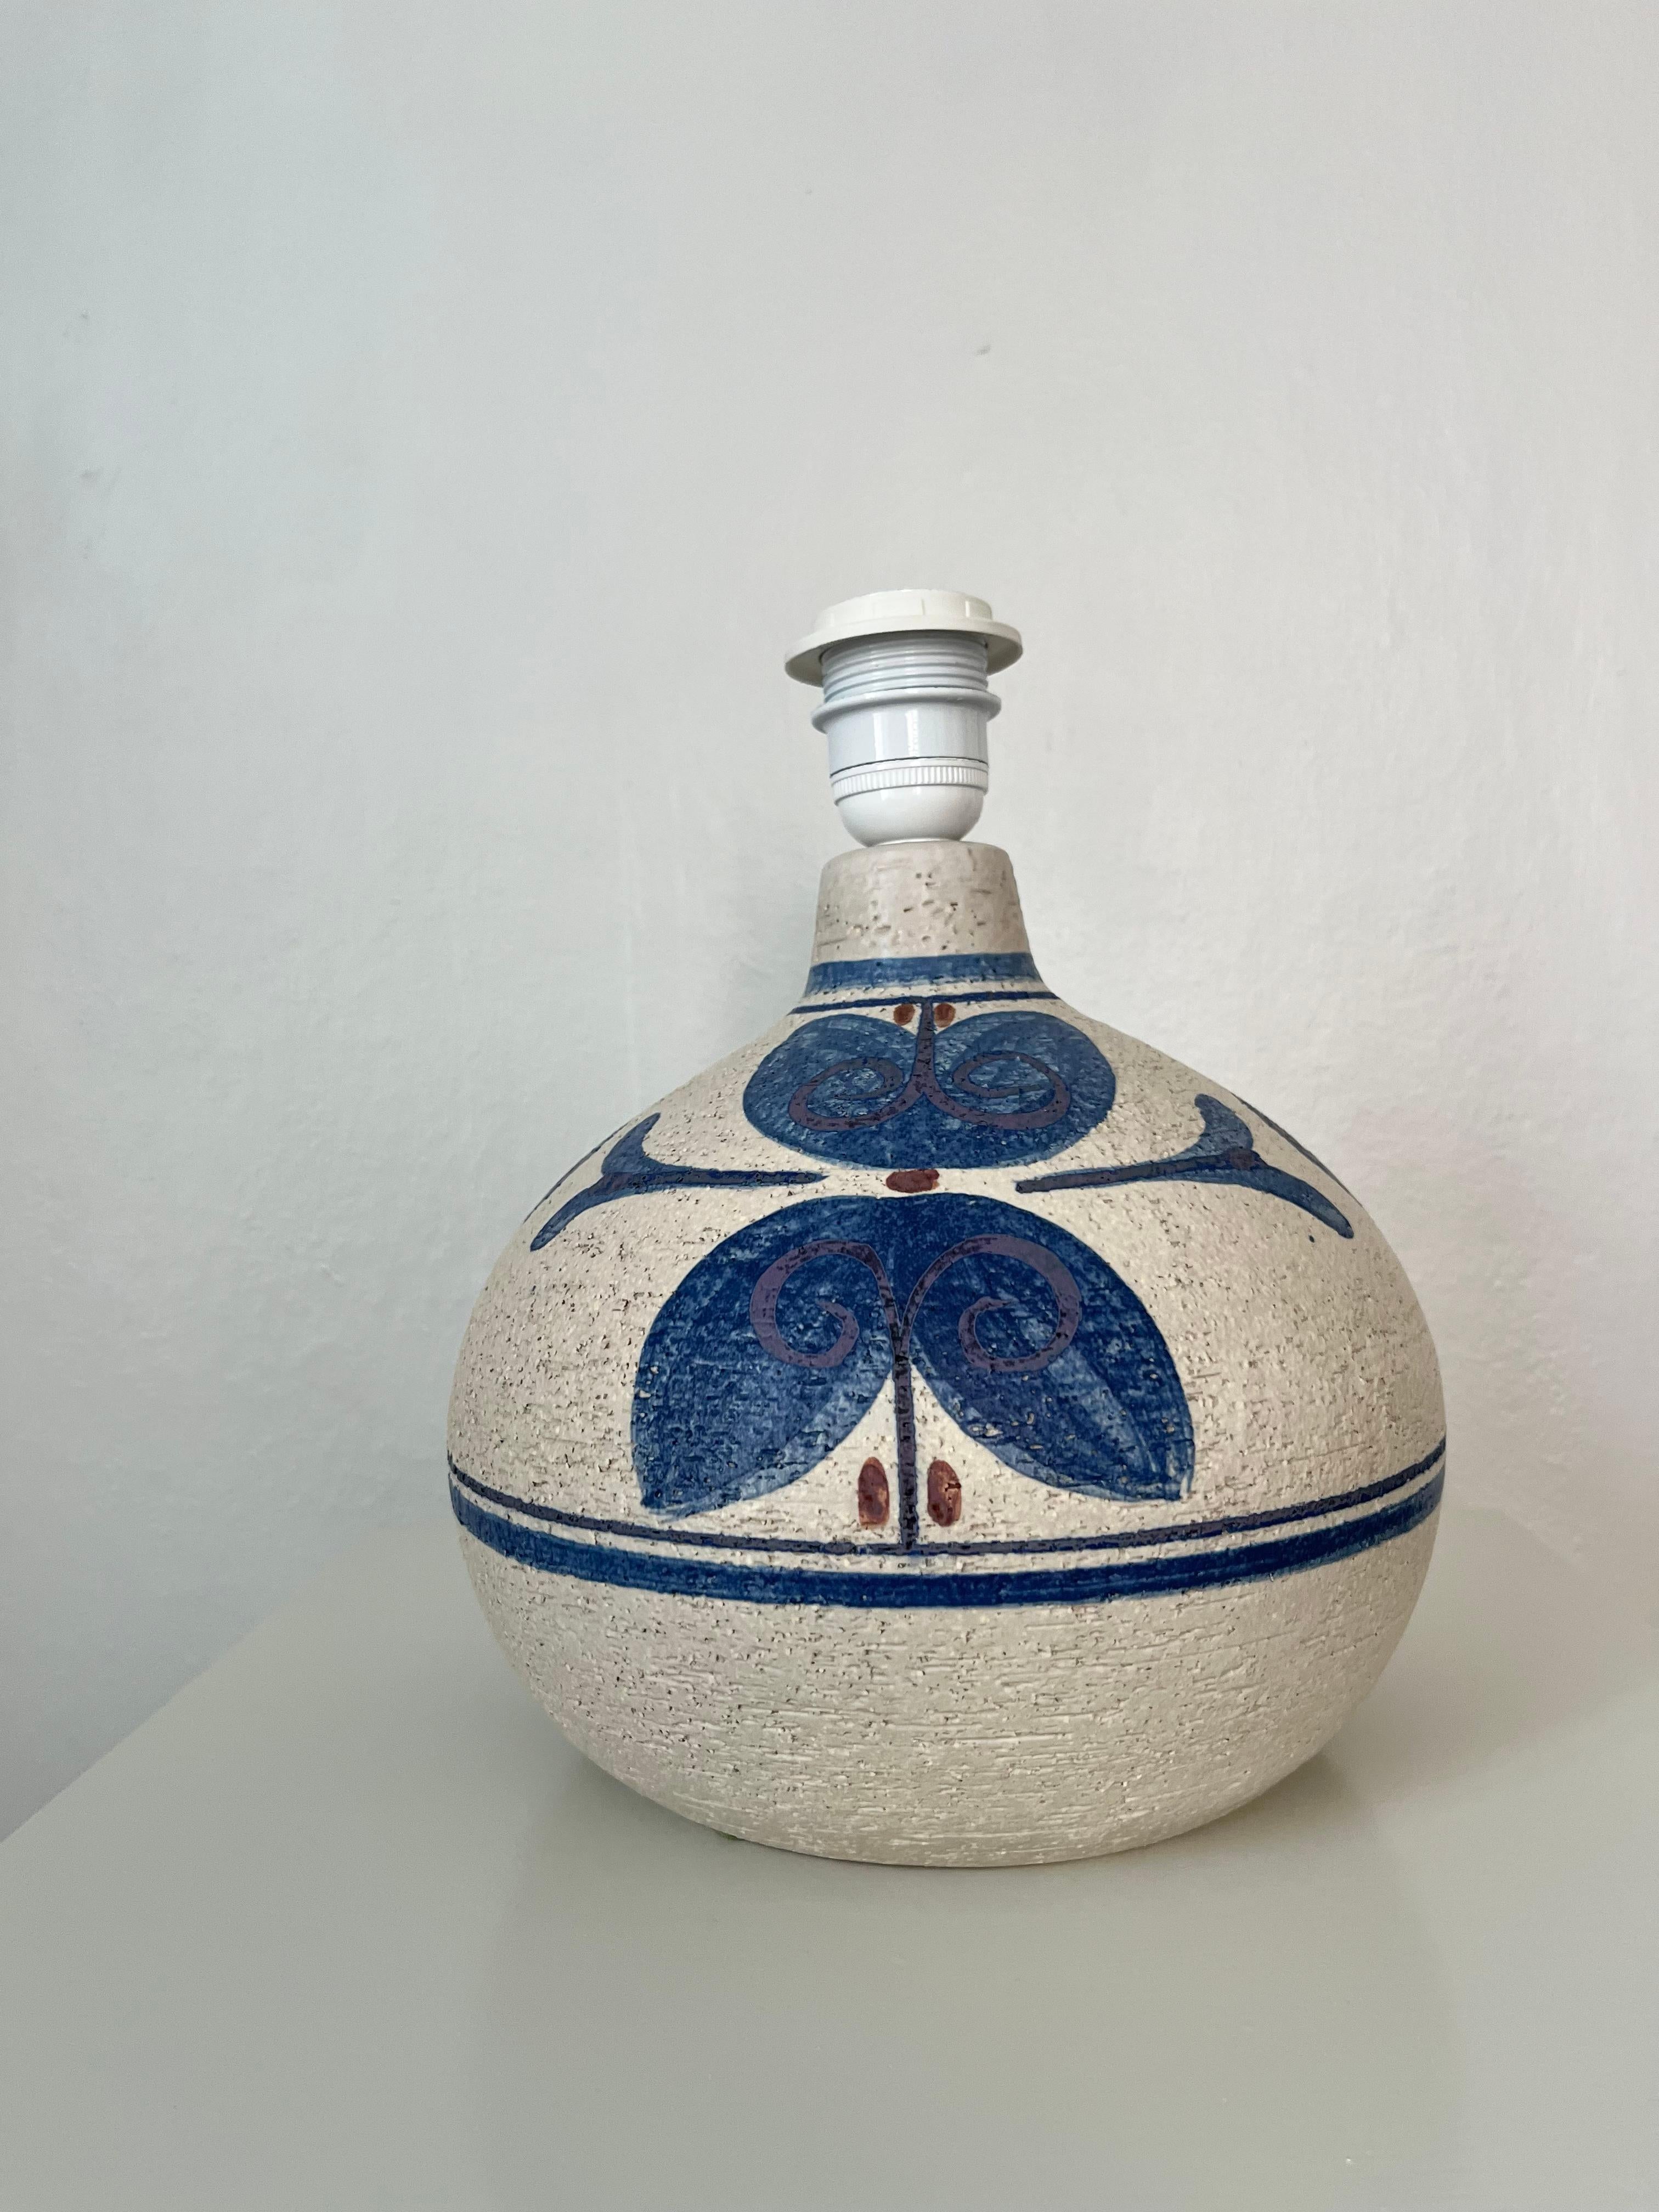 1960s Danish ceramic table lamp by Noomi Backhausen for Søholm In Good Condition For Sale In Frederiksberg C, DK